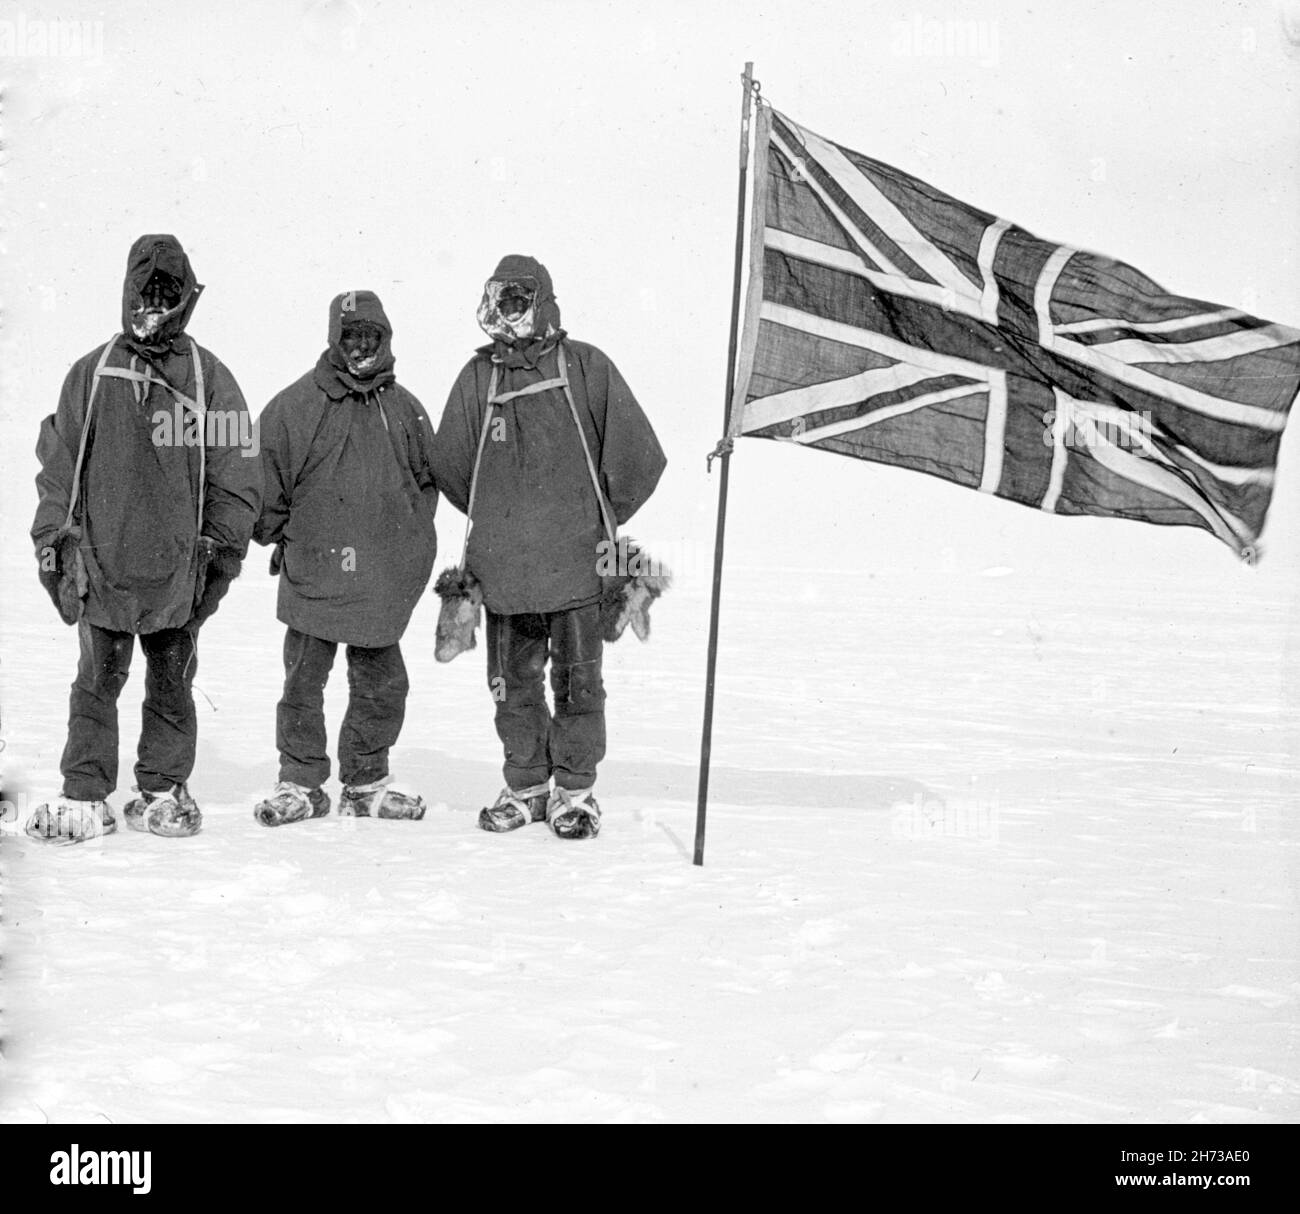 Members of the Ernest Shackleton Nimrod expedition to reach the South Pole in 1907-1909. They are at their most southerly point, at 88 degress 23 minutes south. Stock Photo